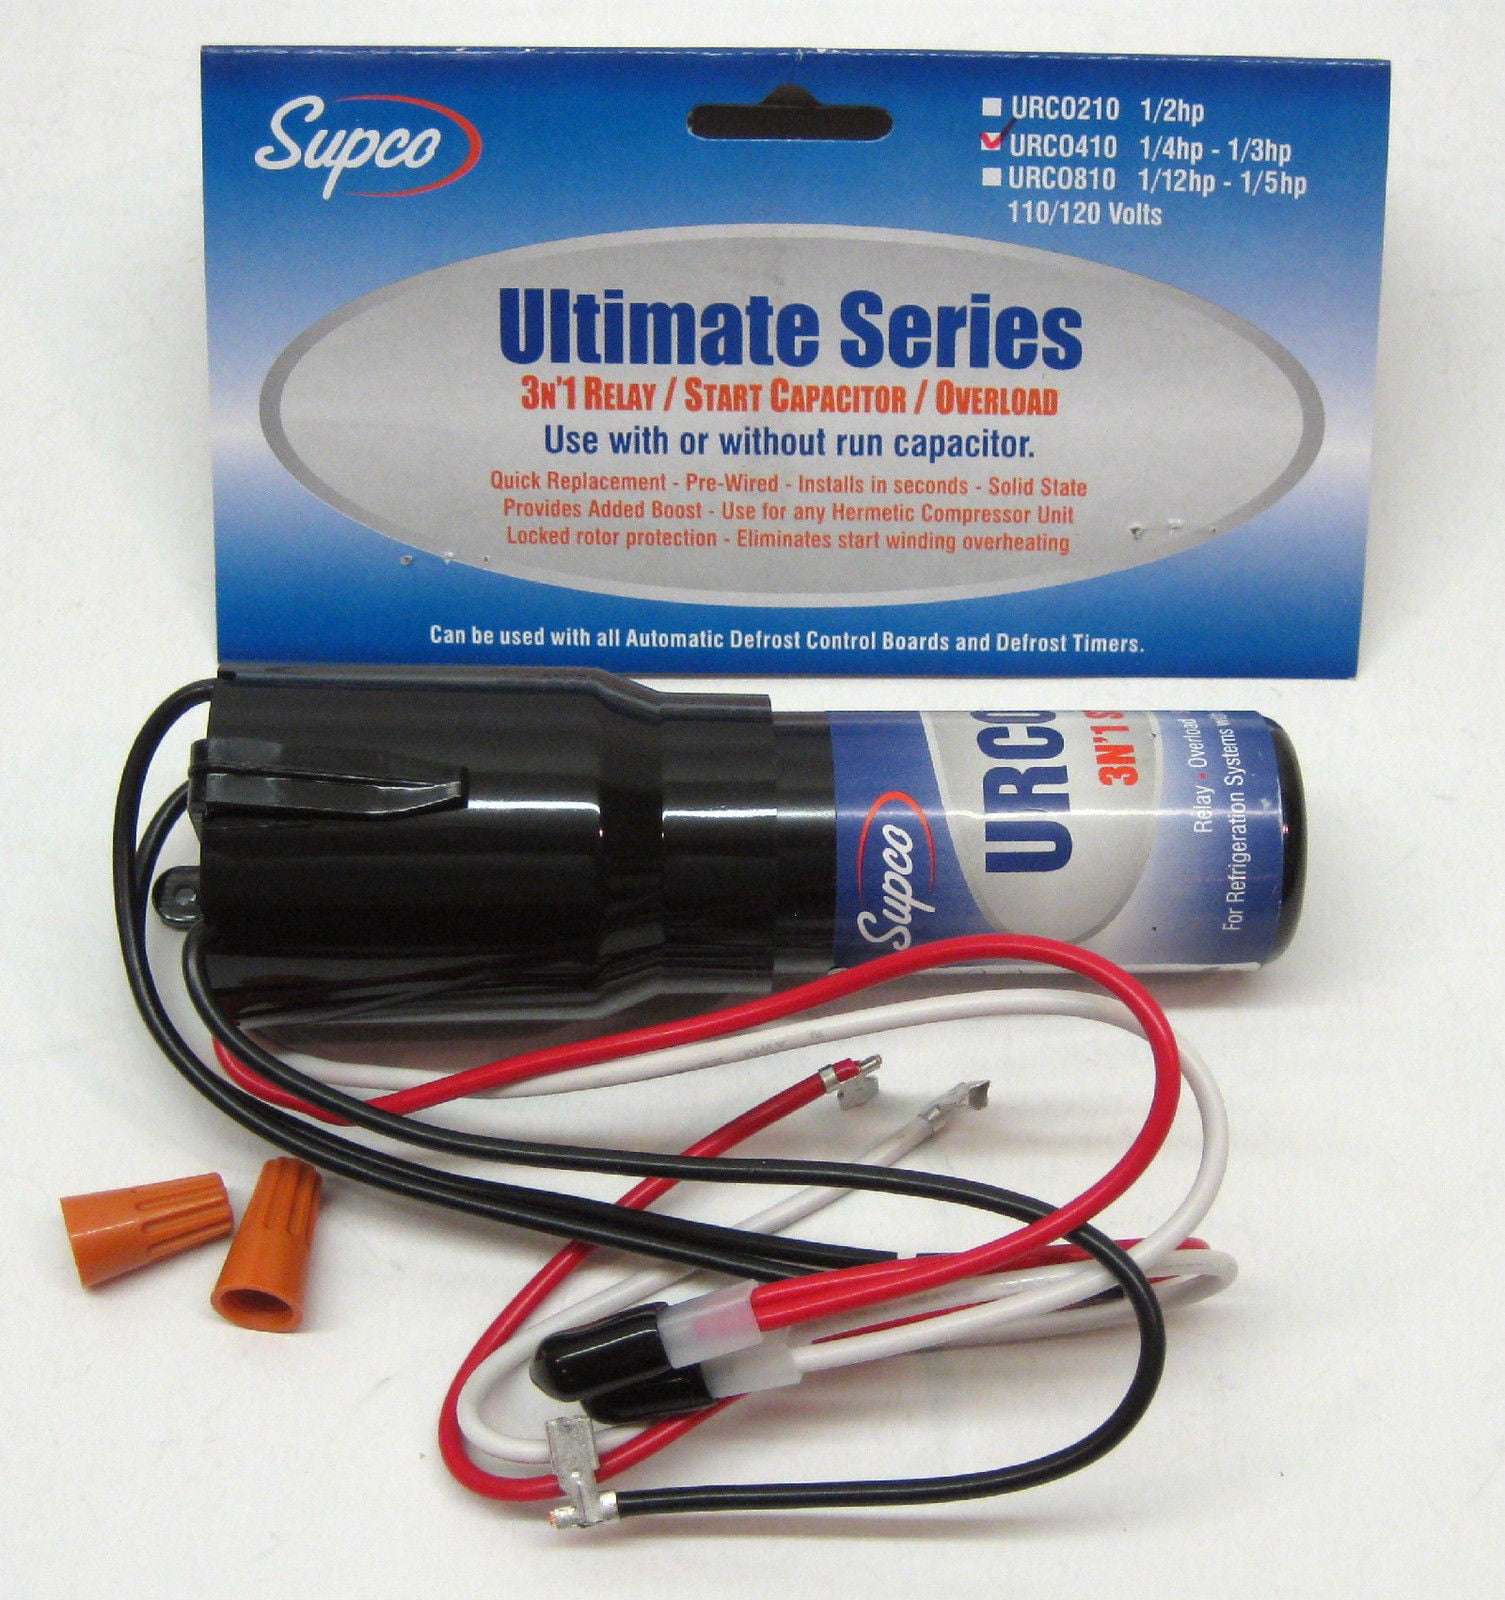 SUPCO RCO SERIES CAPACITOR & OVERLOAD to 1/4P ~ 1/3HP 115V HARD START RELAY 